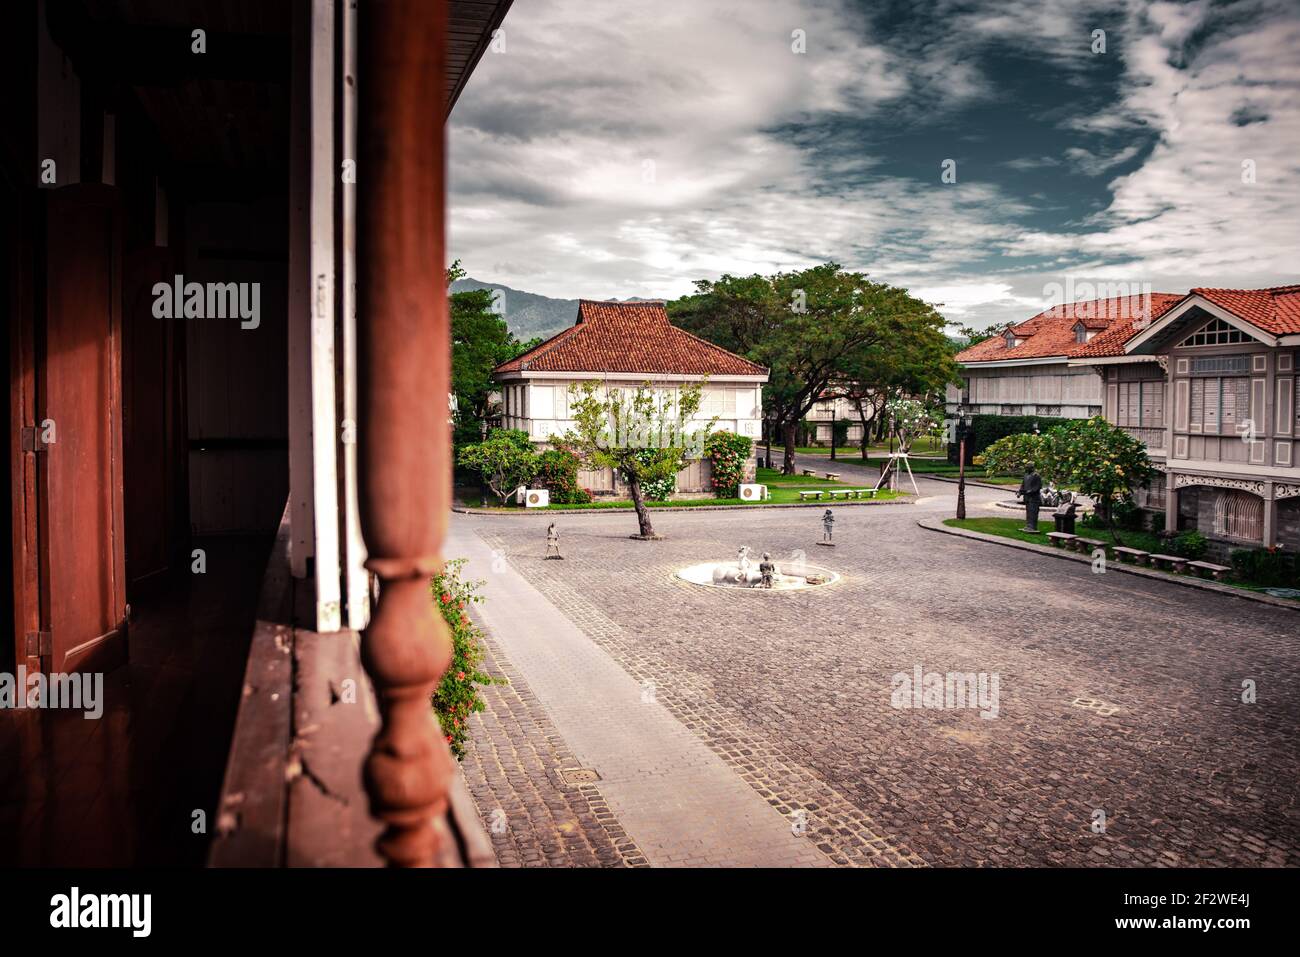 Beautifully reconstructed Filipino heritage and cultural houses that form part of Las Casas FIlipinas de Acuzar resort at Bagac, Bataan, Philippines. Stock Photo